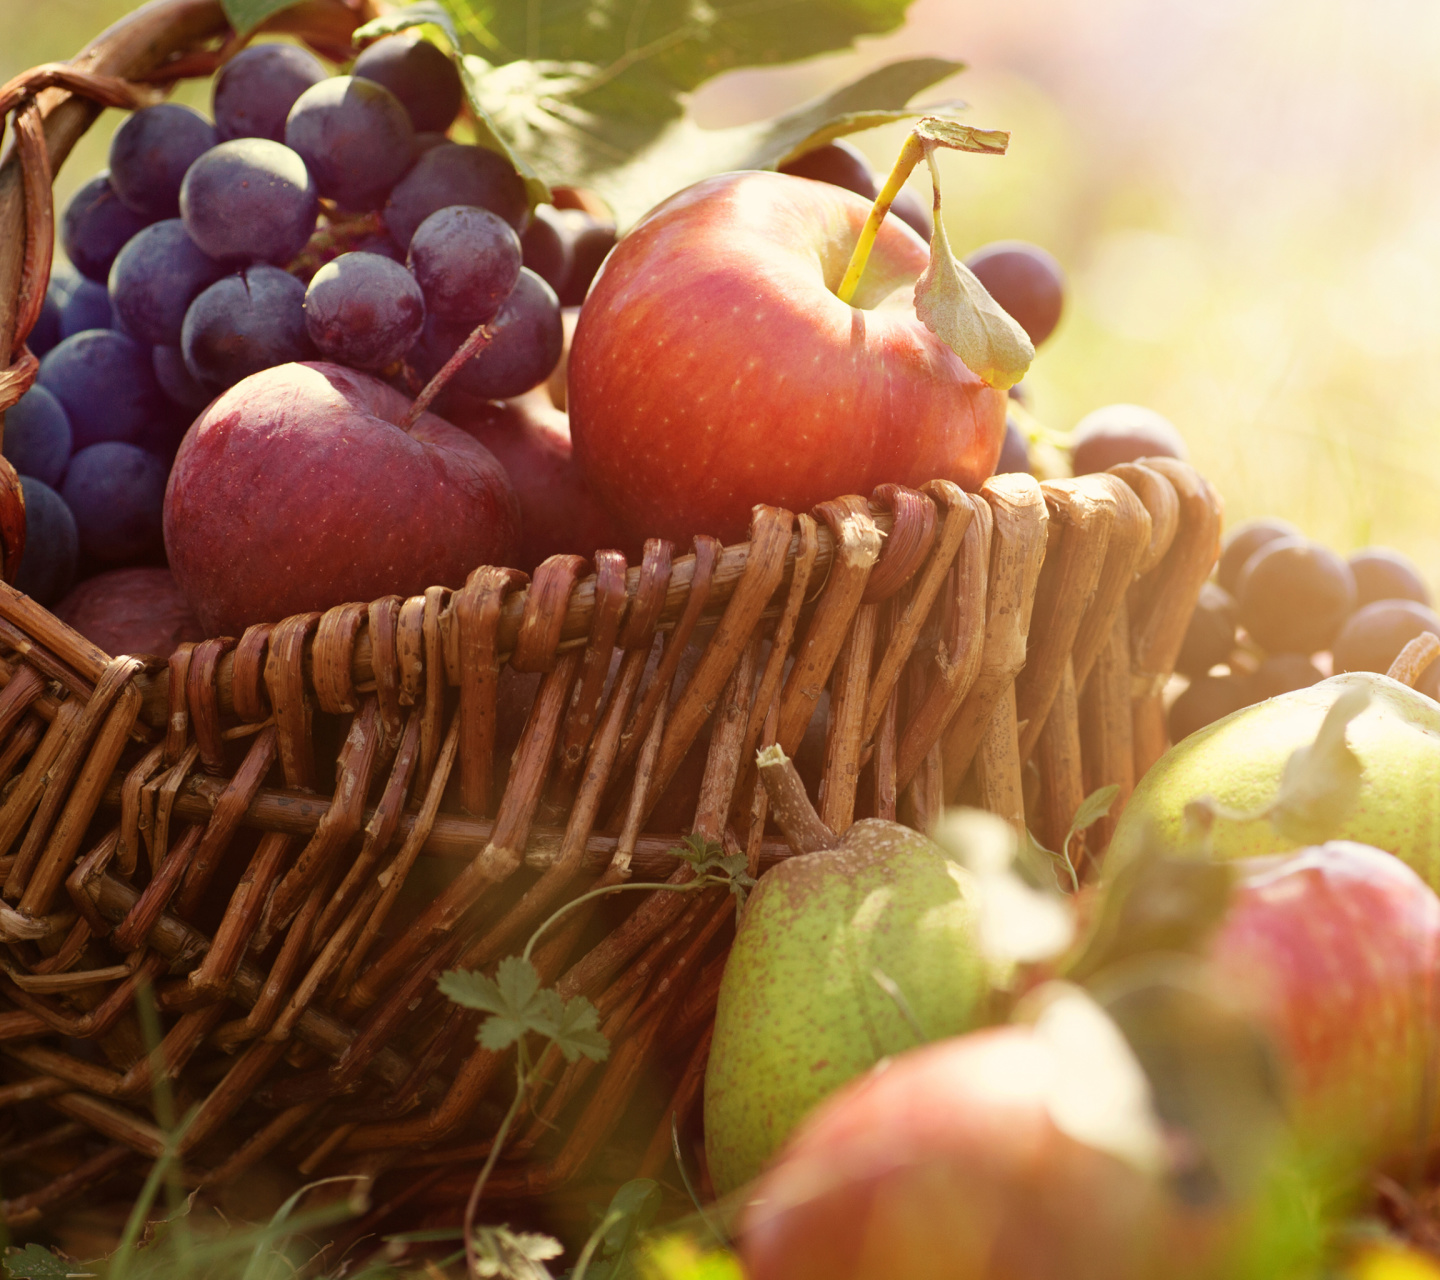 Apples and Grapes wallpaper 1440x1280